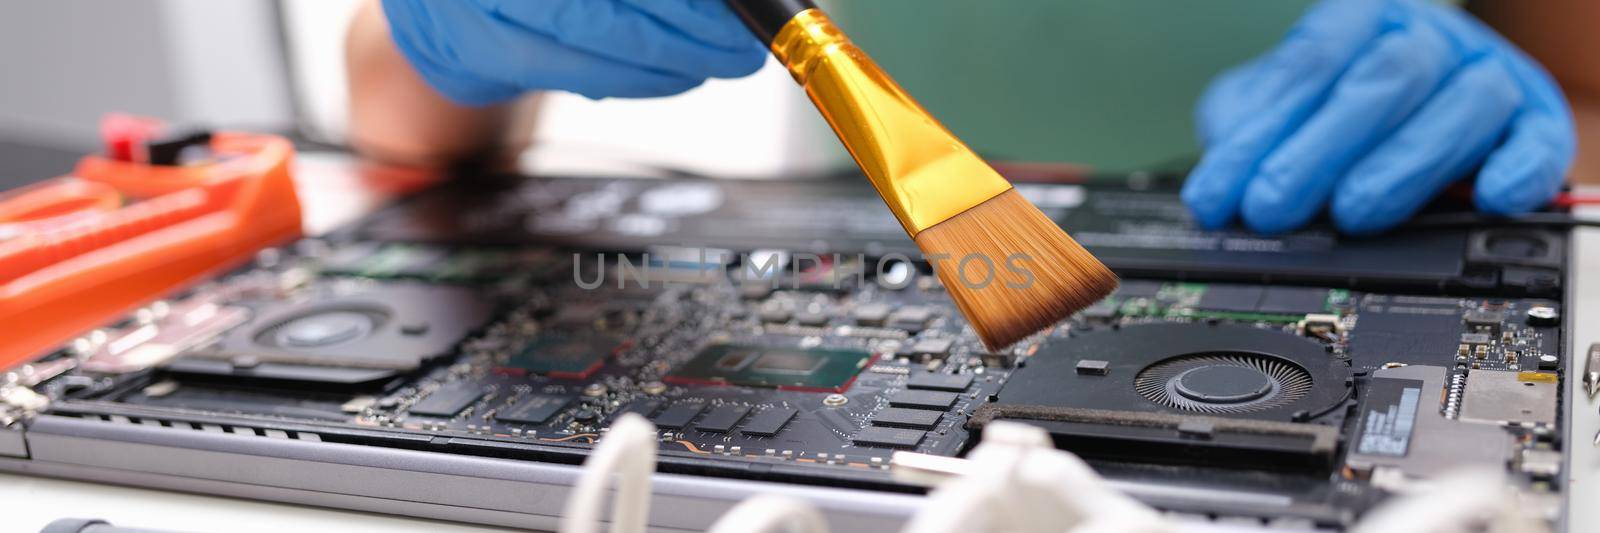 Hands brush the laptop parts from dust, close-up. Repair and maintenance of electronic devices, worker technical engineer